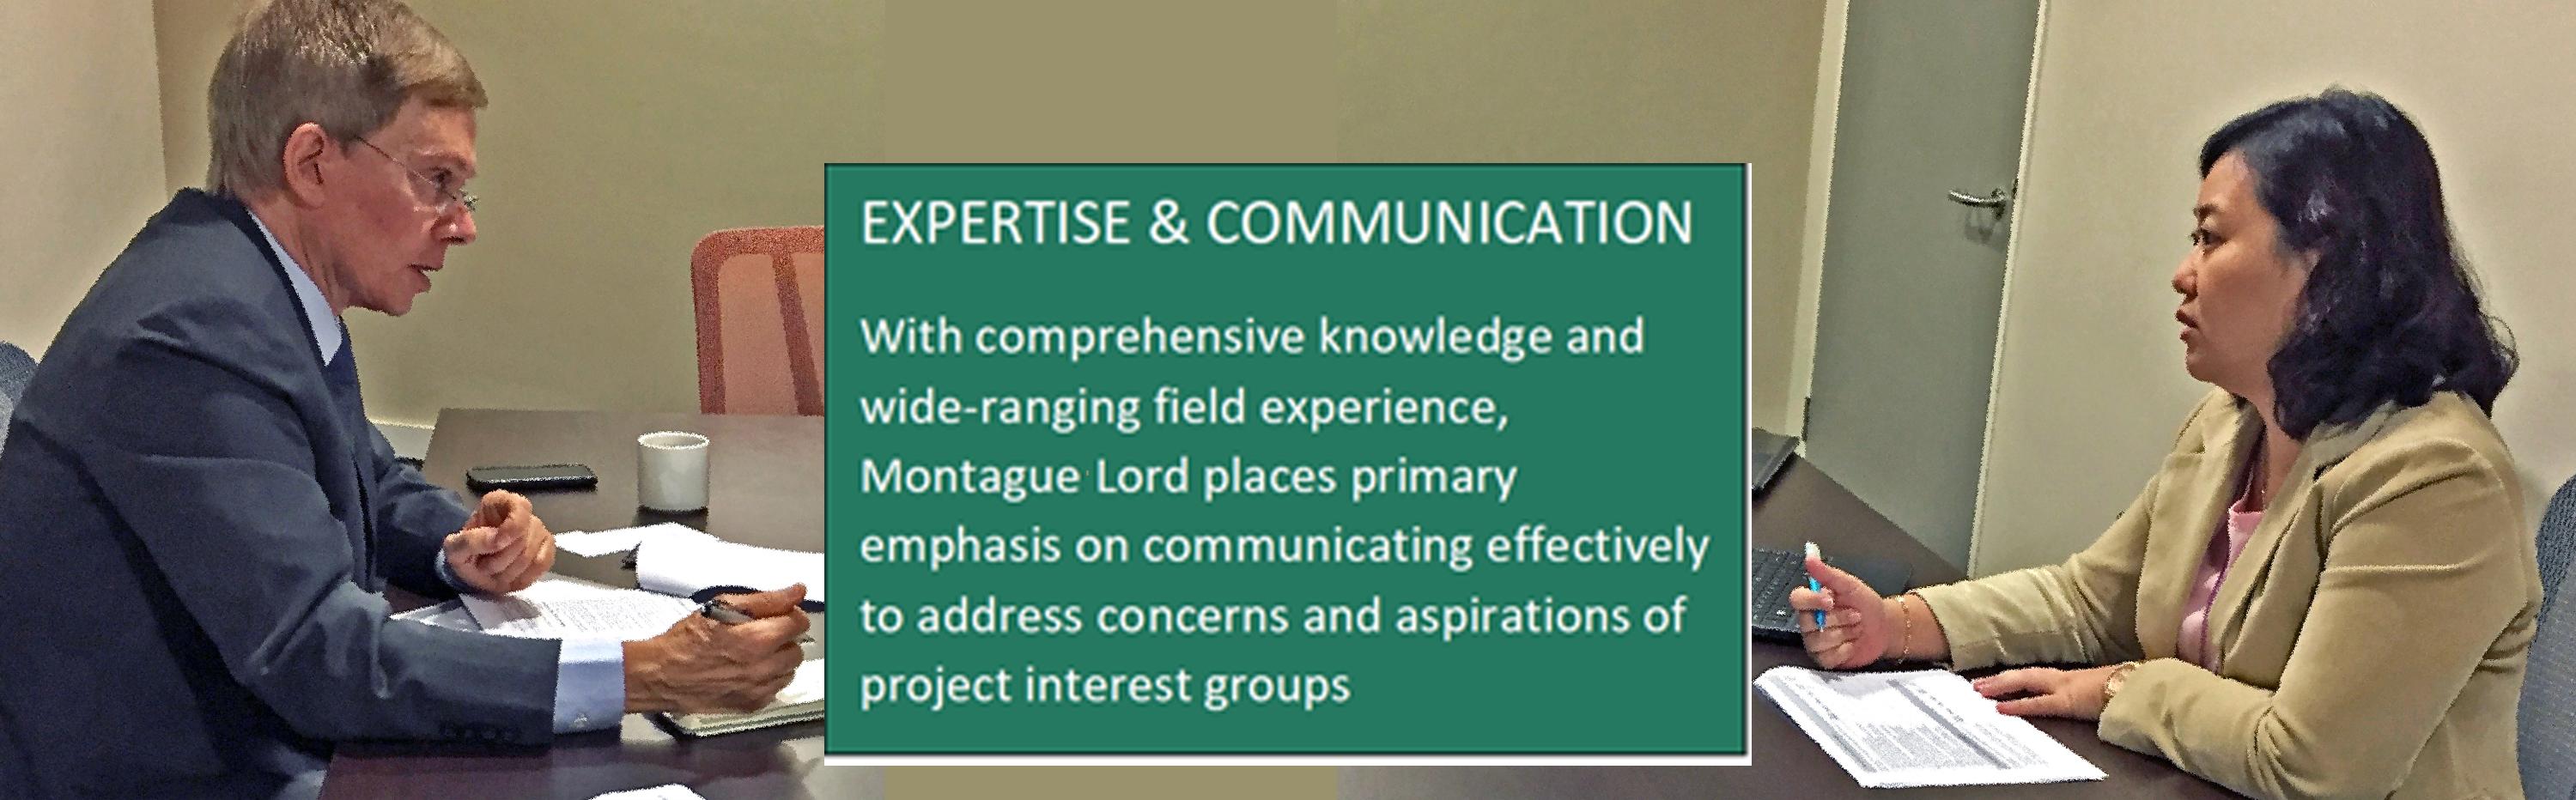 Expertise and Communication